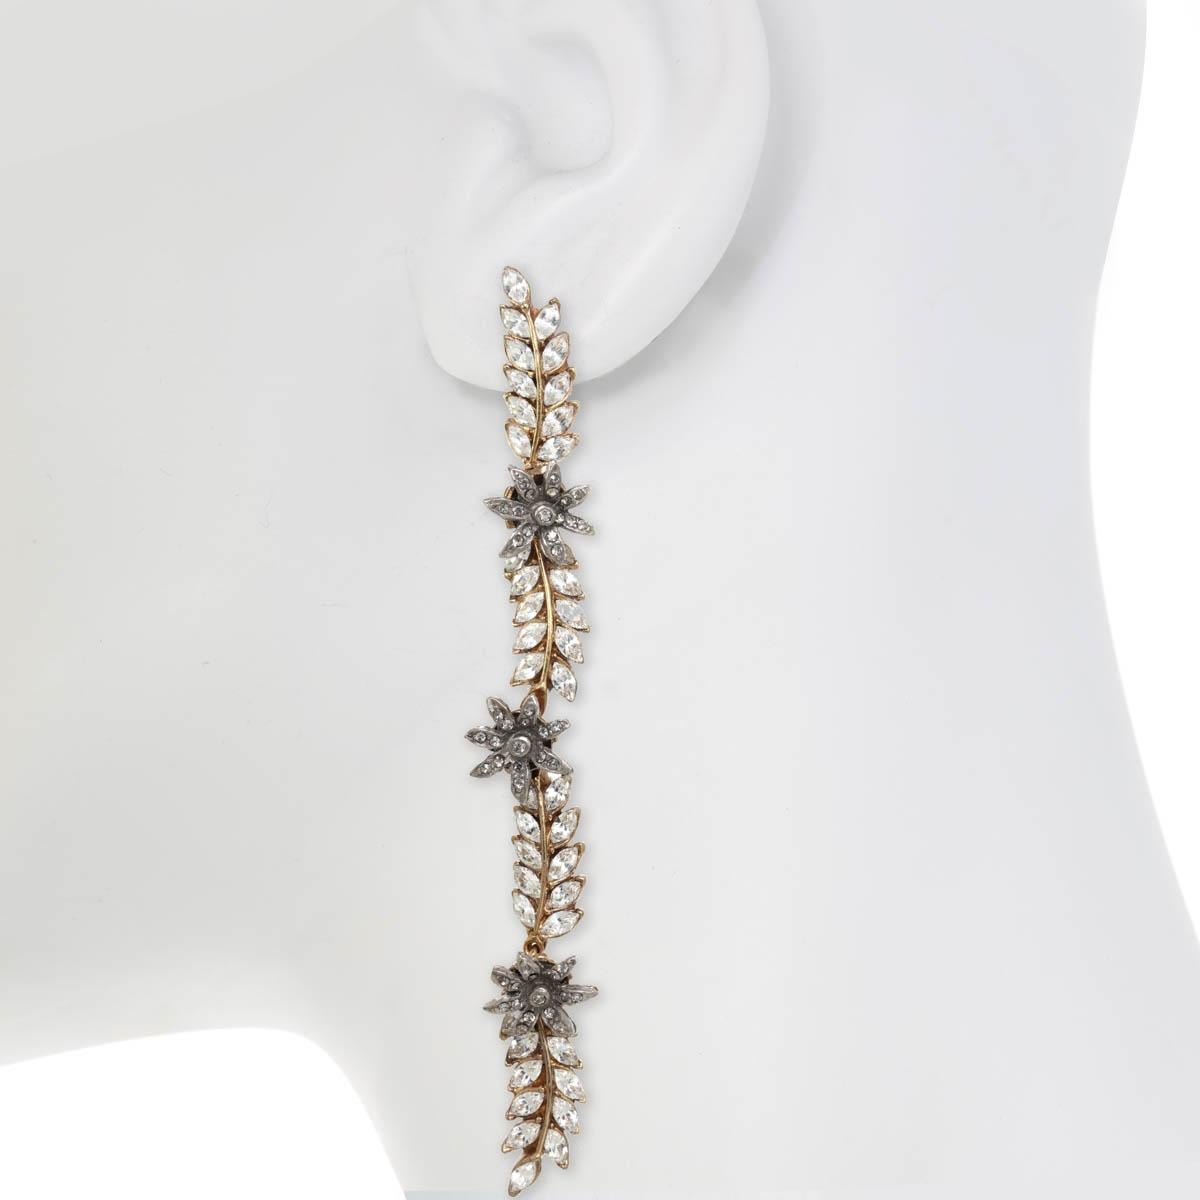 Crystal encrusted vines with vintage glass flower petals offer a romantic and elegant look on the Statement Vine Earring, from season I of the Ines x Ciner collaboration.

Materials:
Pewter
18K Gold Plating
Genuine Rhodium Plating
Crystal